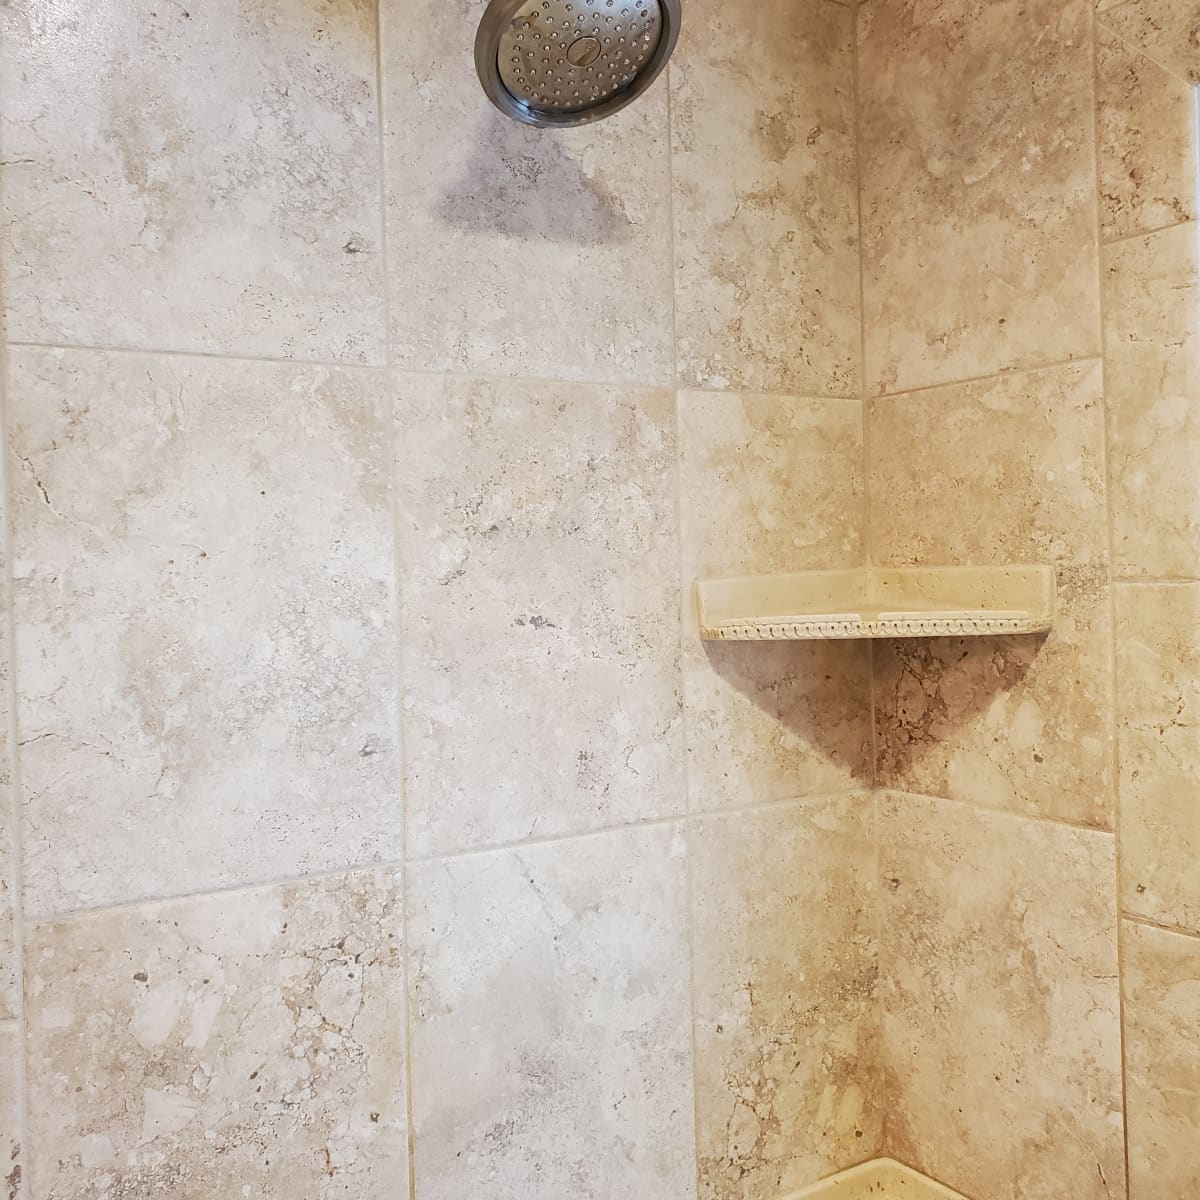 How To Remove Hard Water Stains From, How To Clean Chlorine Stains From Tiles